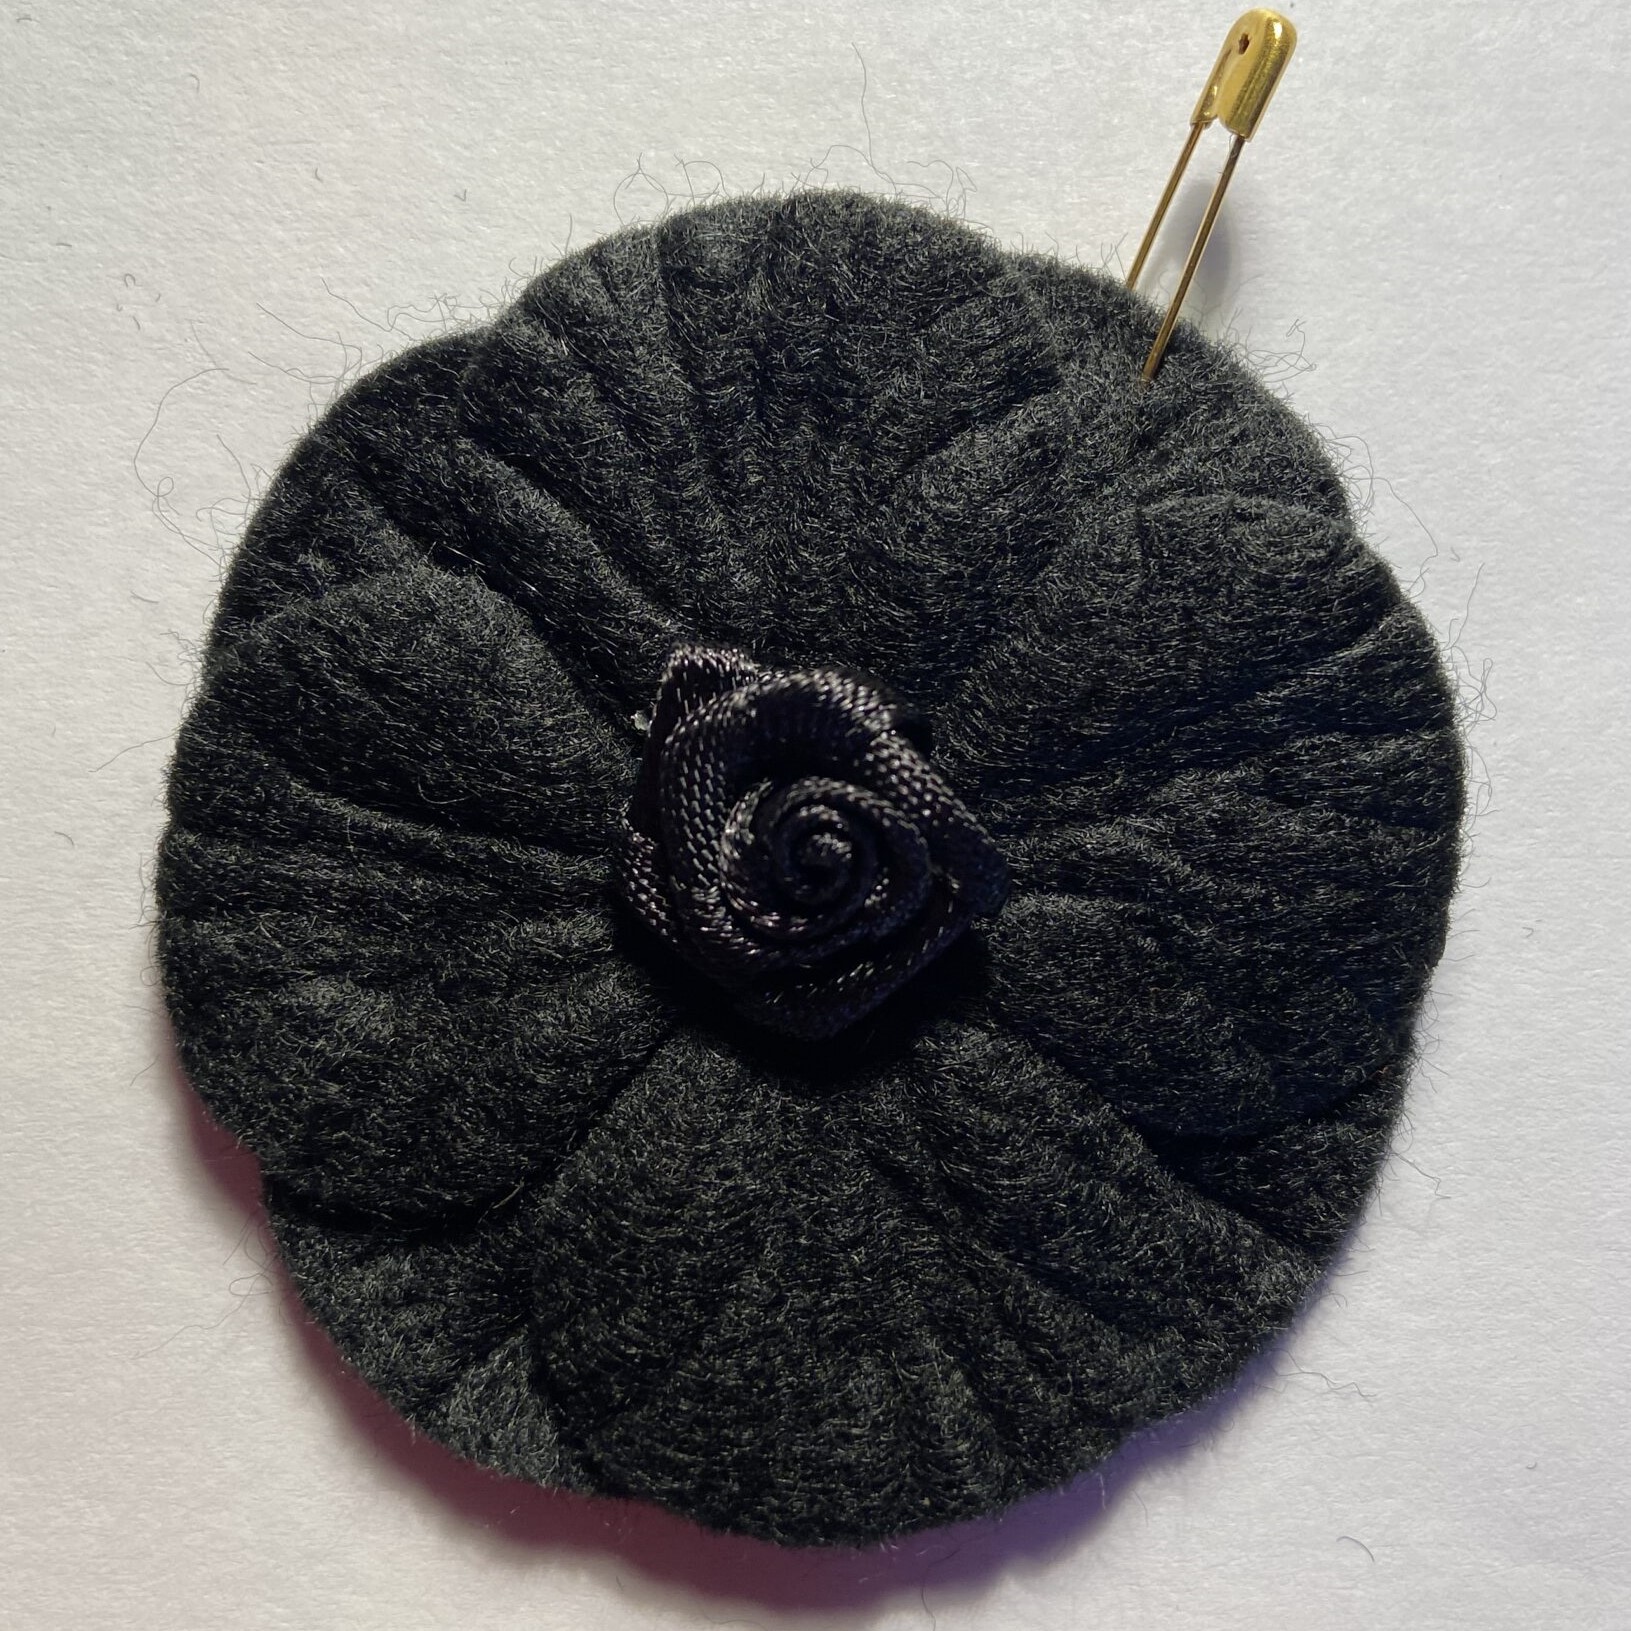 A black fabric poppy with a rose design at the centre